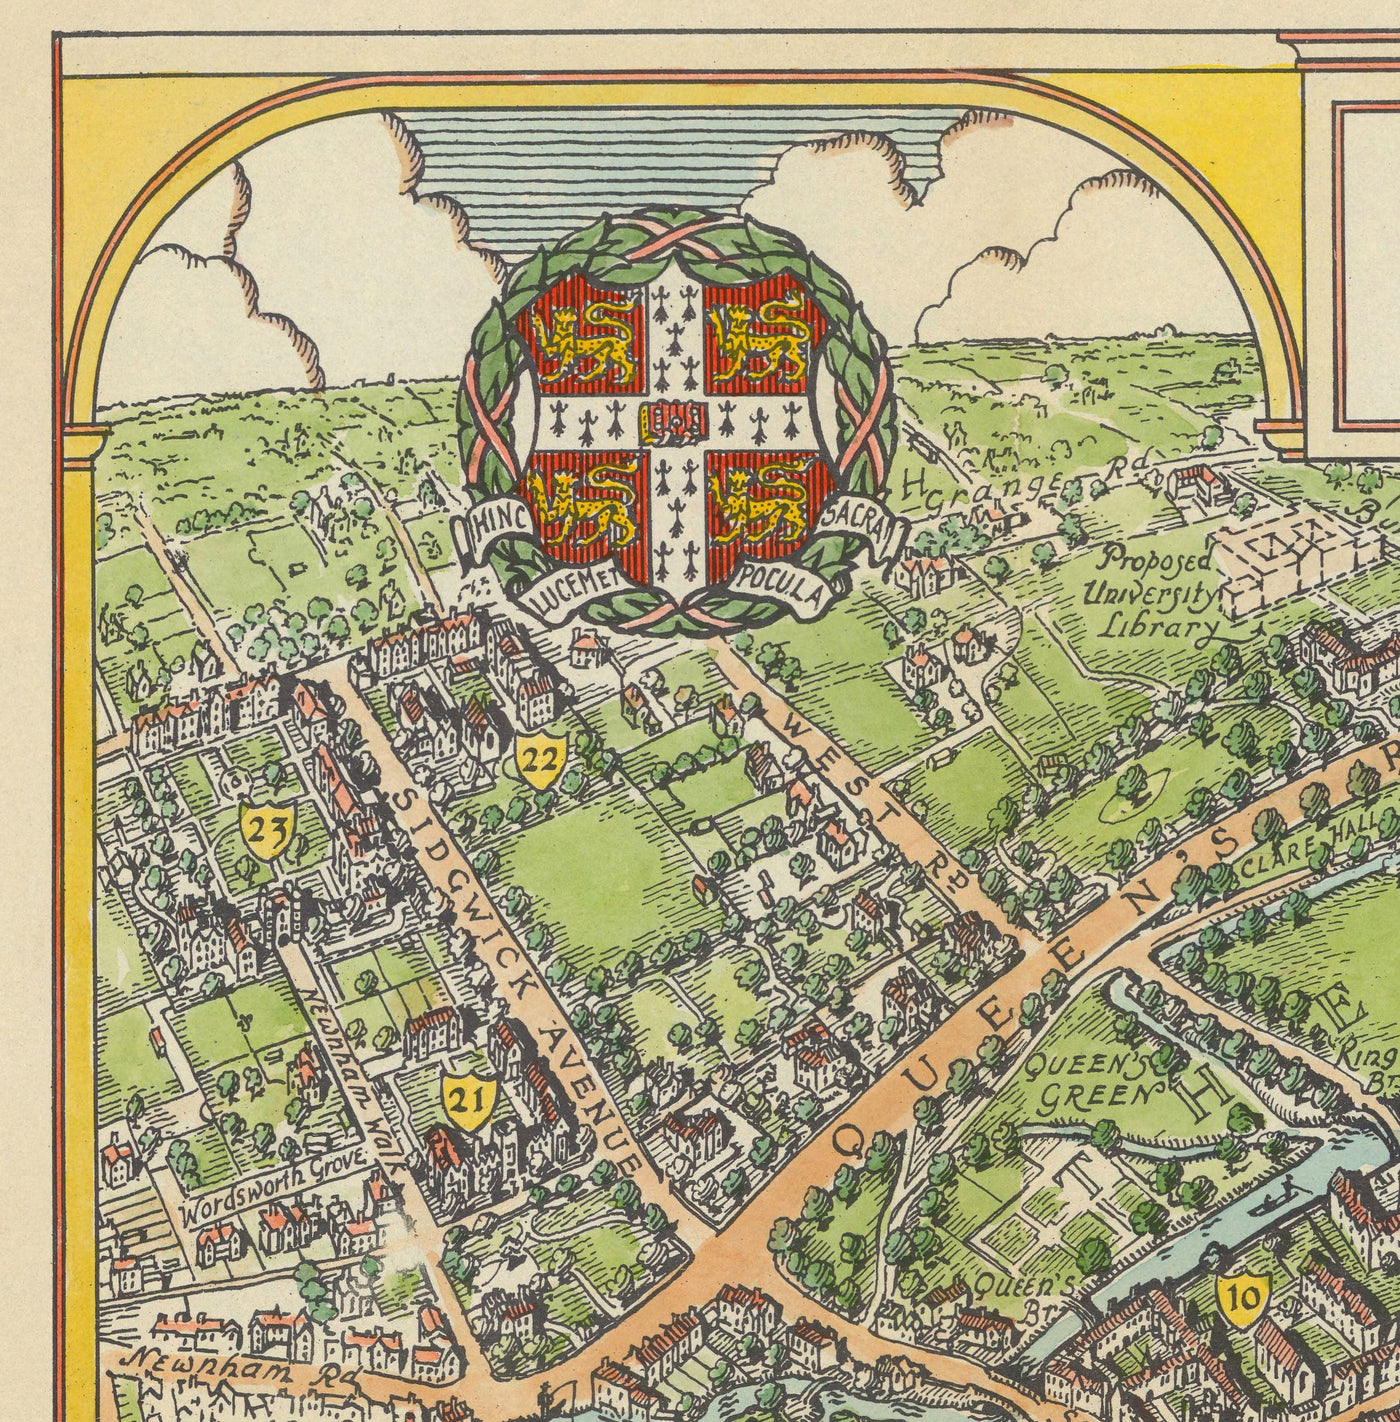 Old Map of Cambridge, 1929 - Trinity, St John's, King's, Peterhouse, Jesus - University and Colleges